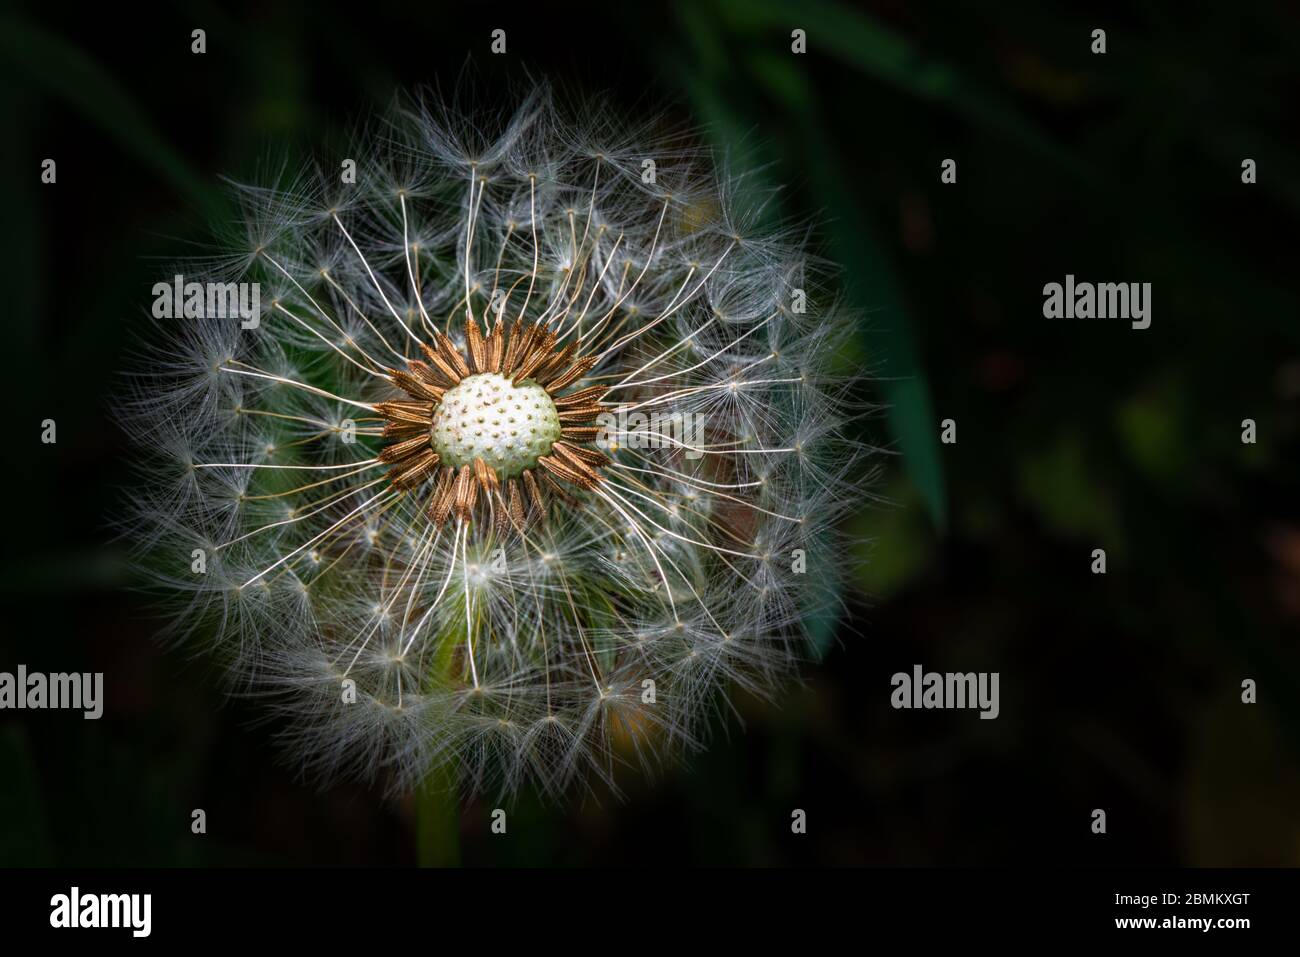 The delicate pattern in close up of the seed head of a Dandelion against a dark background in Spring, Blackpool, Lancashire, England, UK Stock Photo